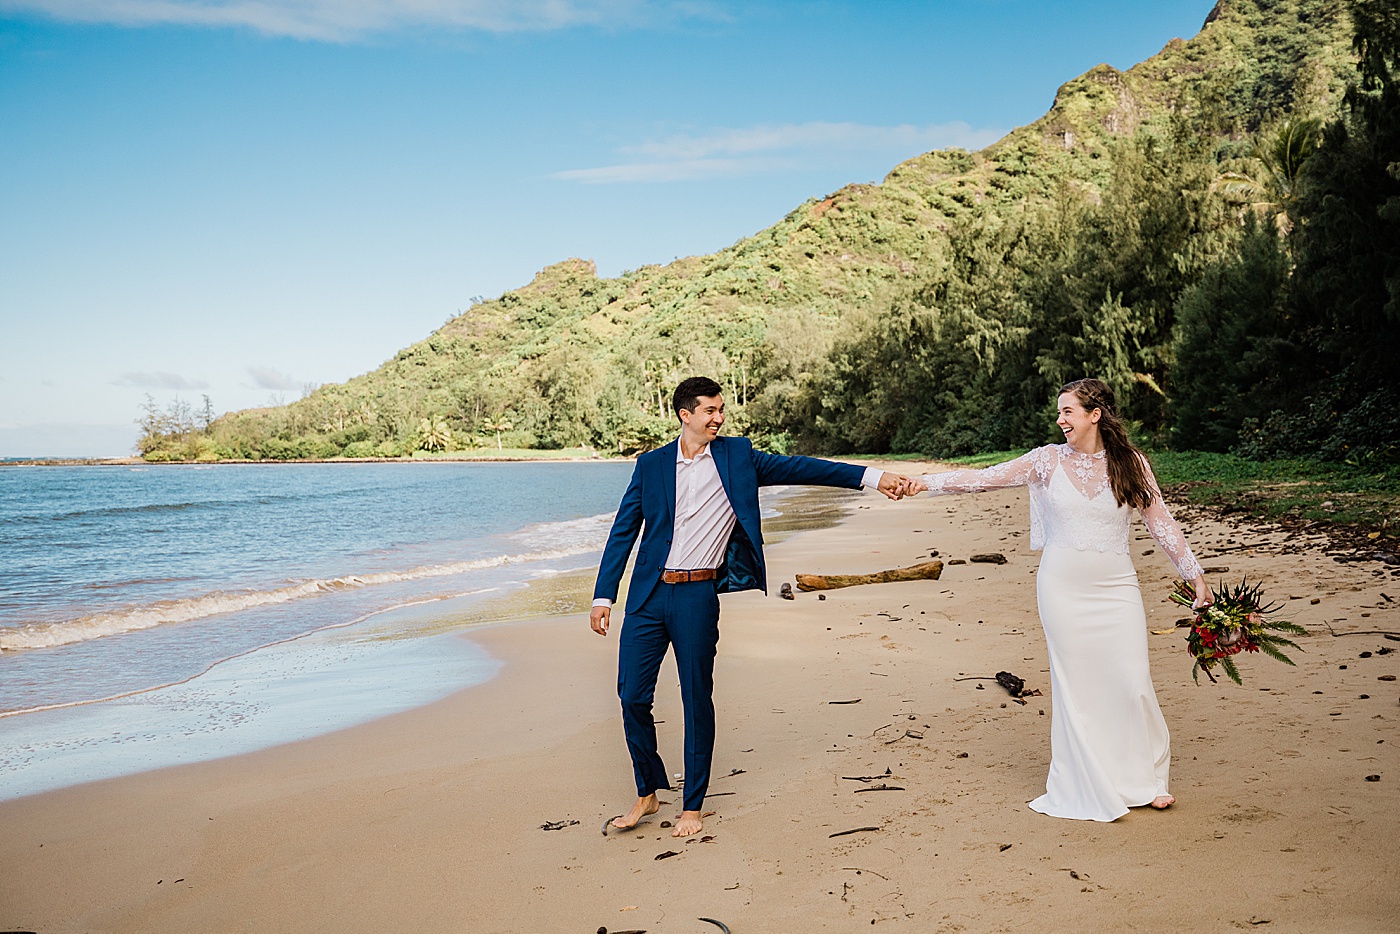 Adventurous Oahu elopement at the beach. Bride and groom holding hands running down the beach.